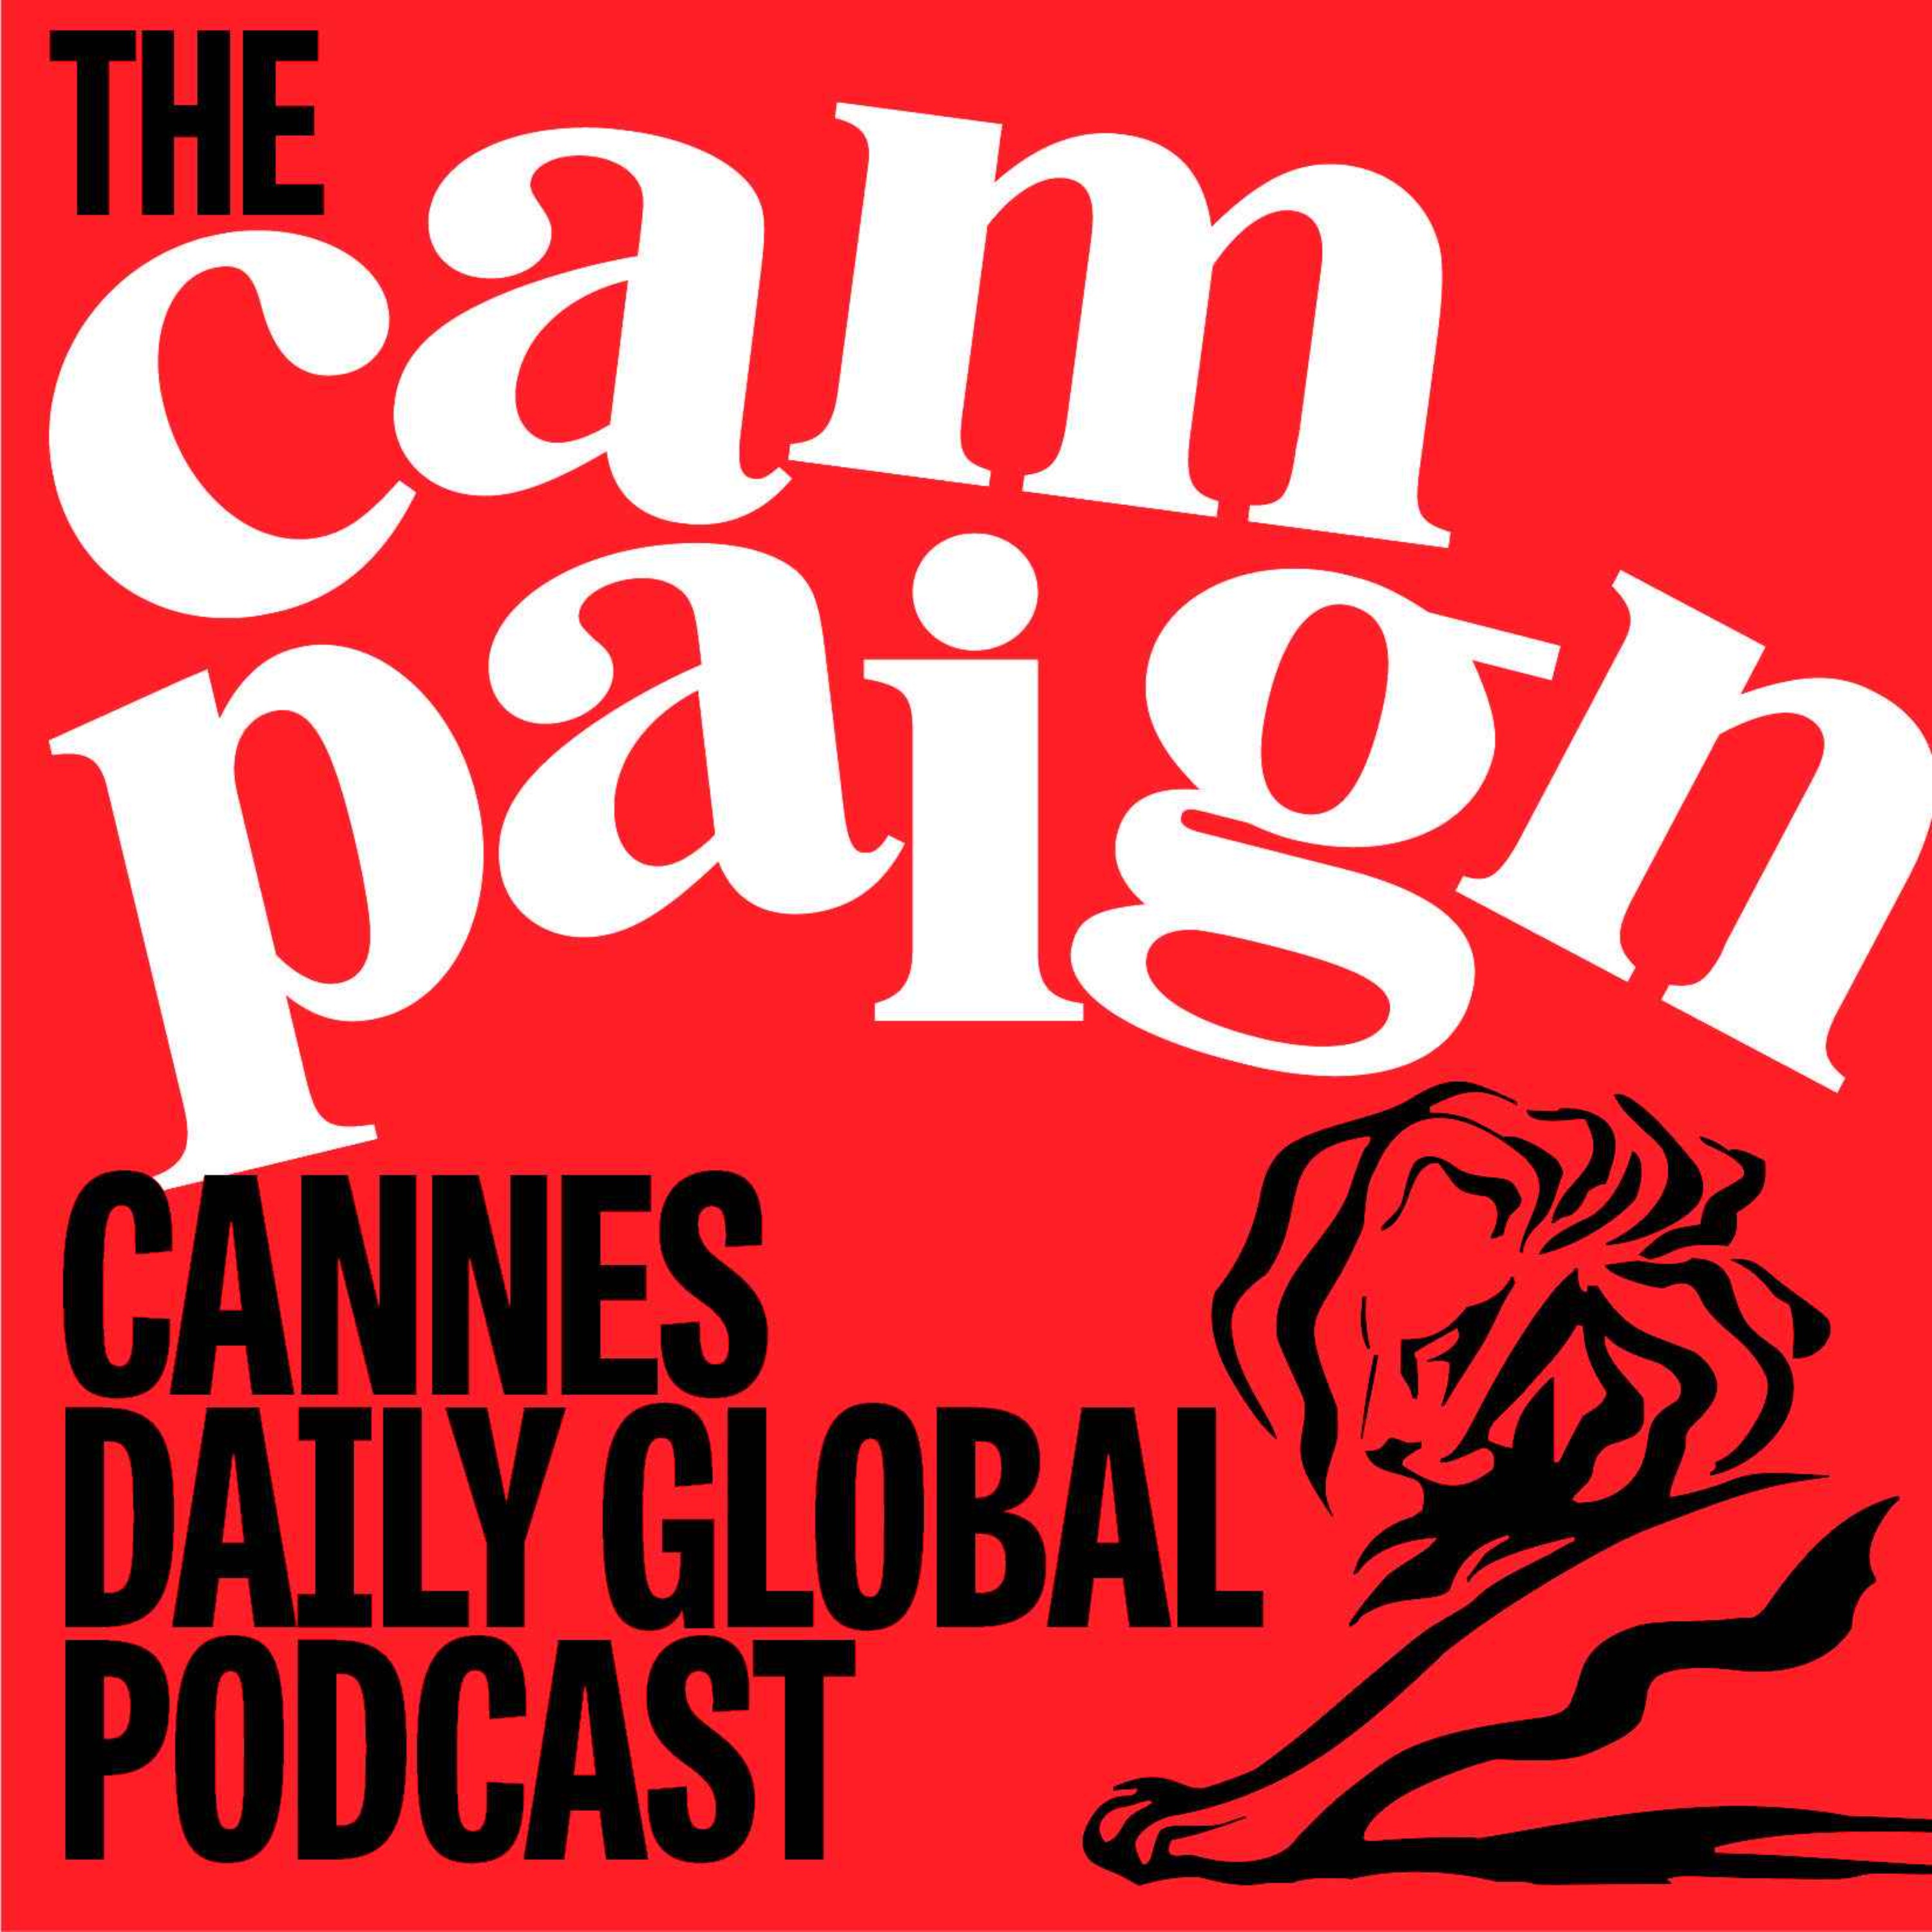 Cannes Daily Global Podcast ep. 1: Festival predictions & 6% rise in entrIes